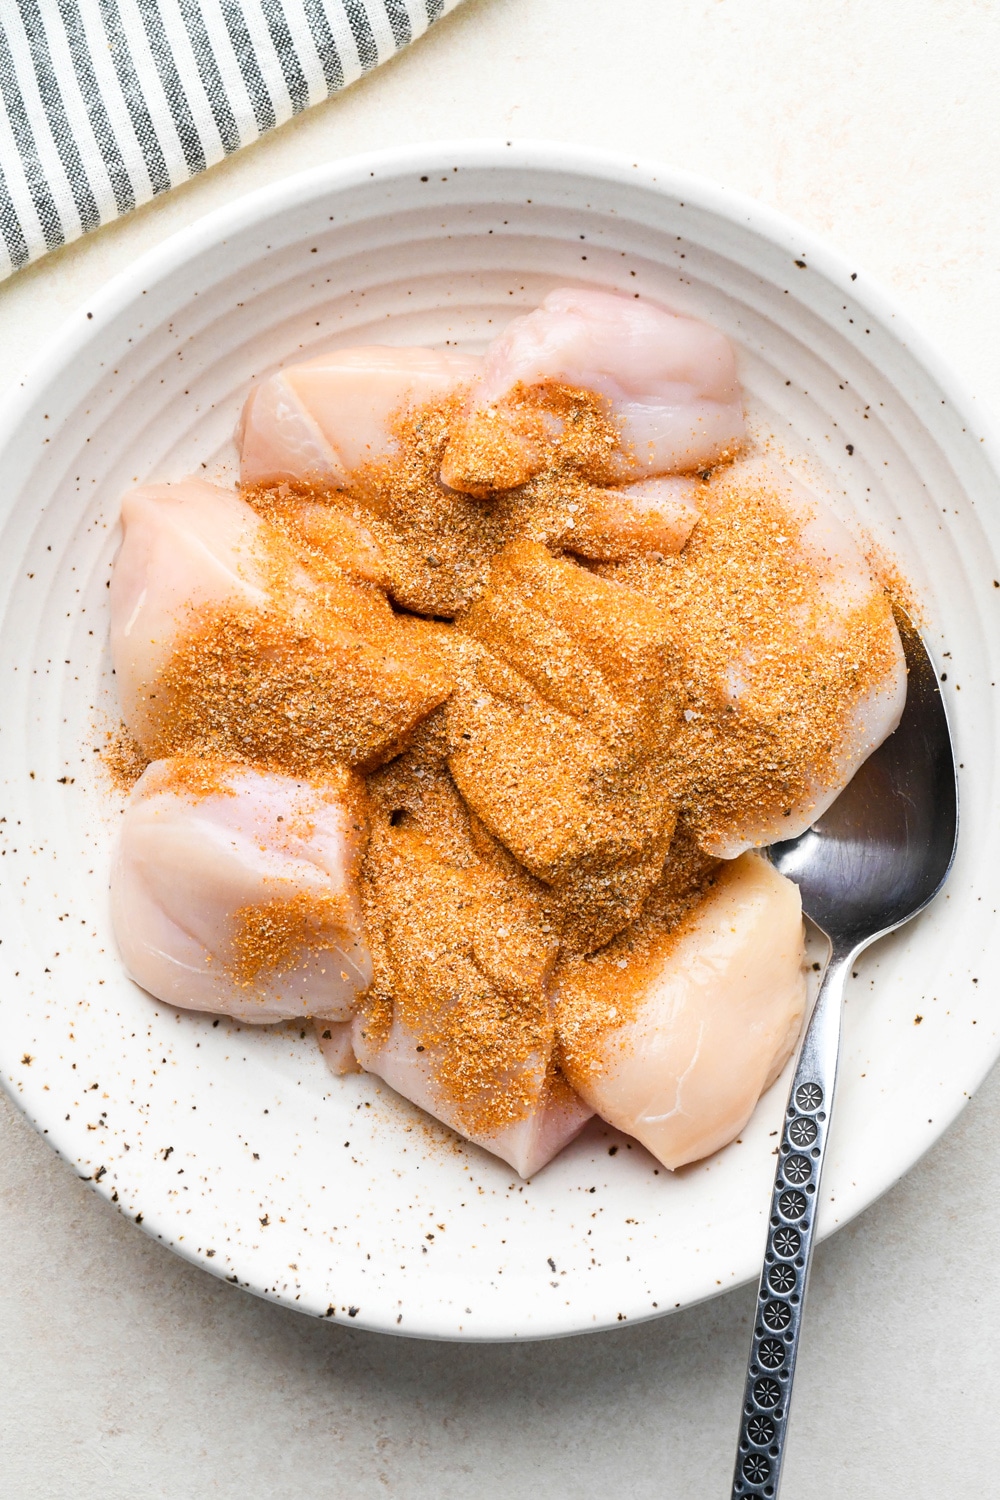 How to make curry chicken and rice: Spice mixture sprinkled over chicken breast pieces in a large ceramic bowl.